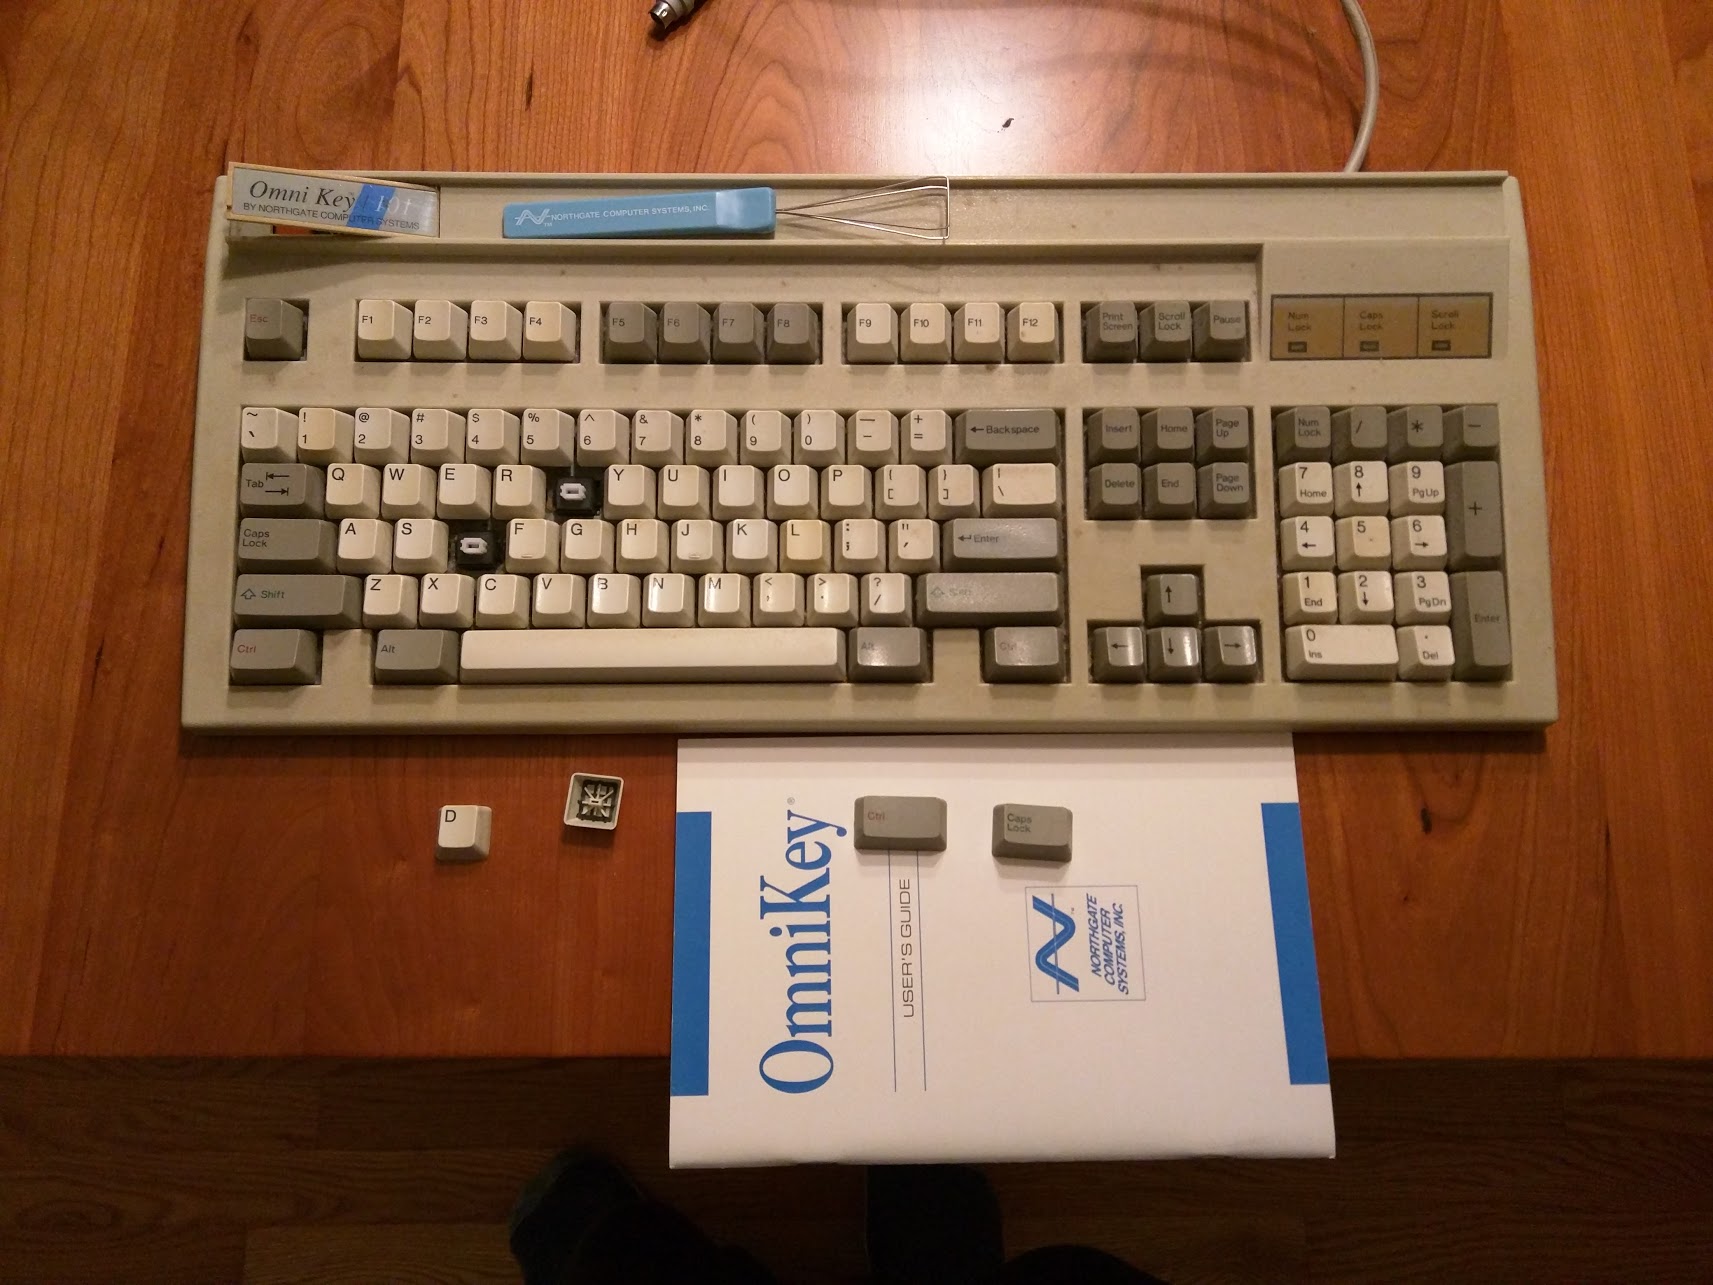 Northgate OmniKey 101 (that needs cleaning)